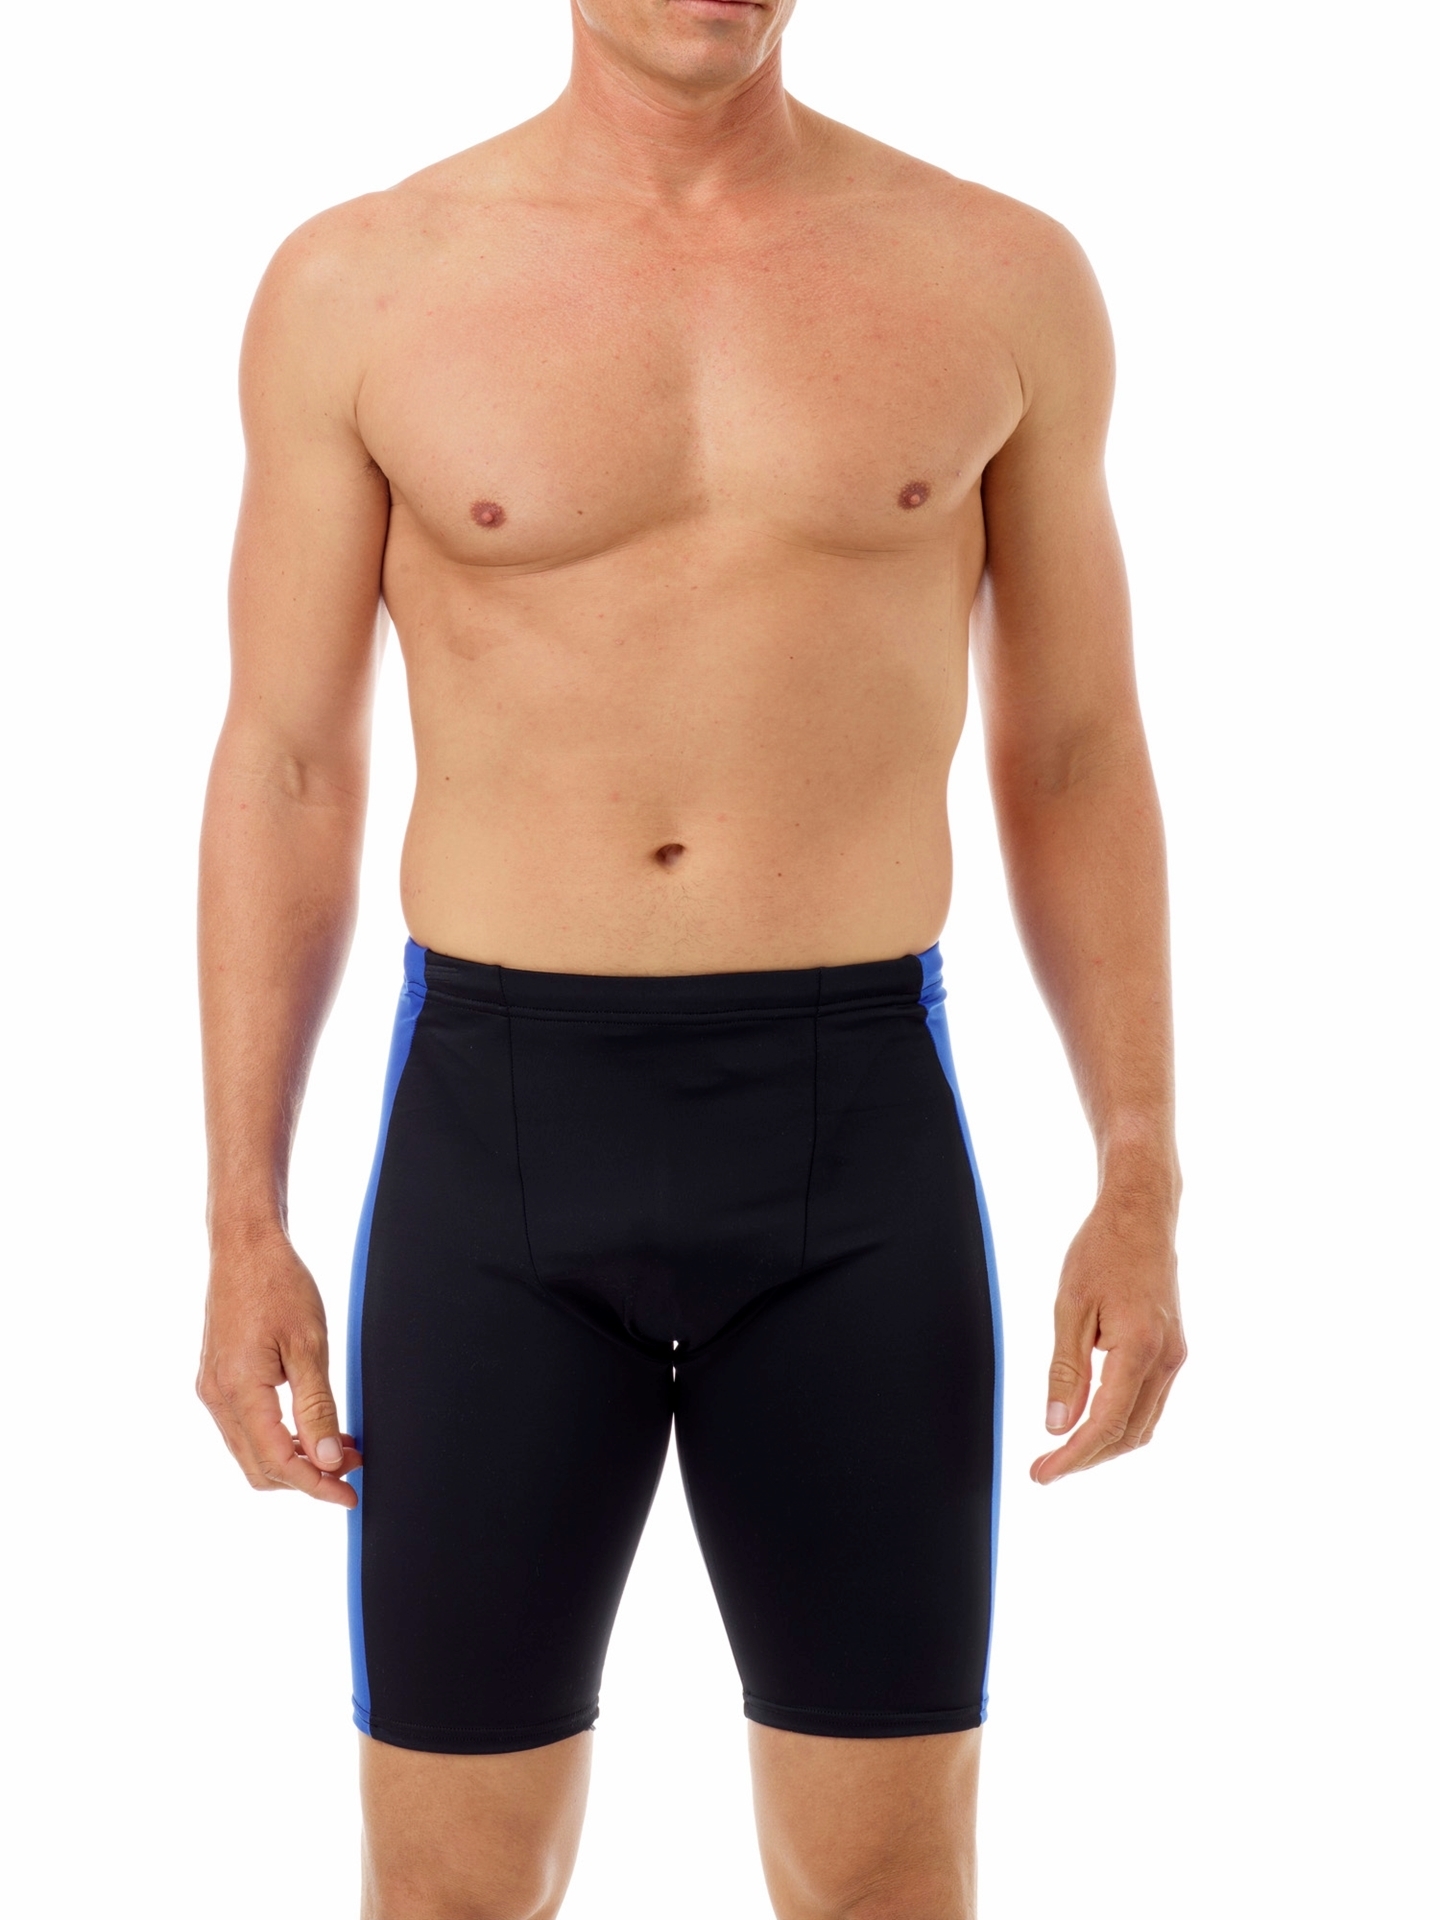 nike swim trunks with compression liner